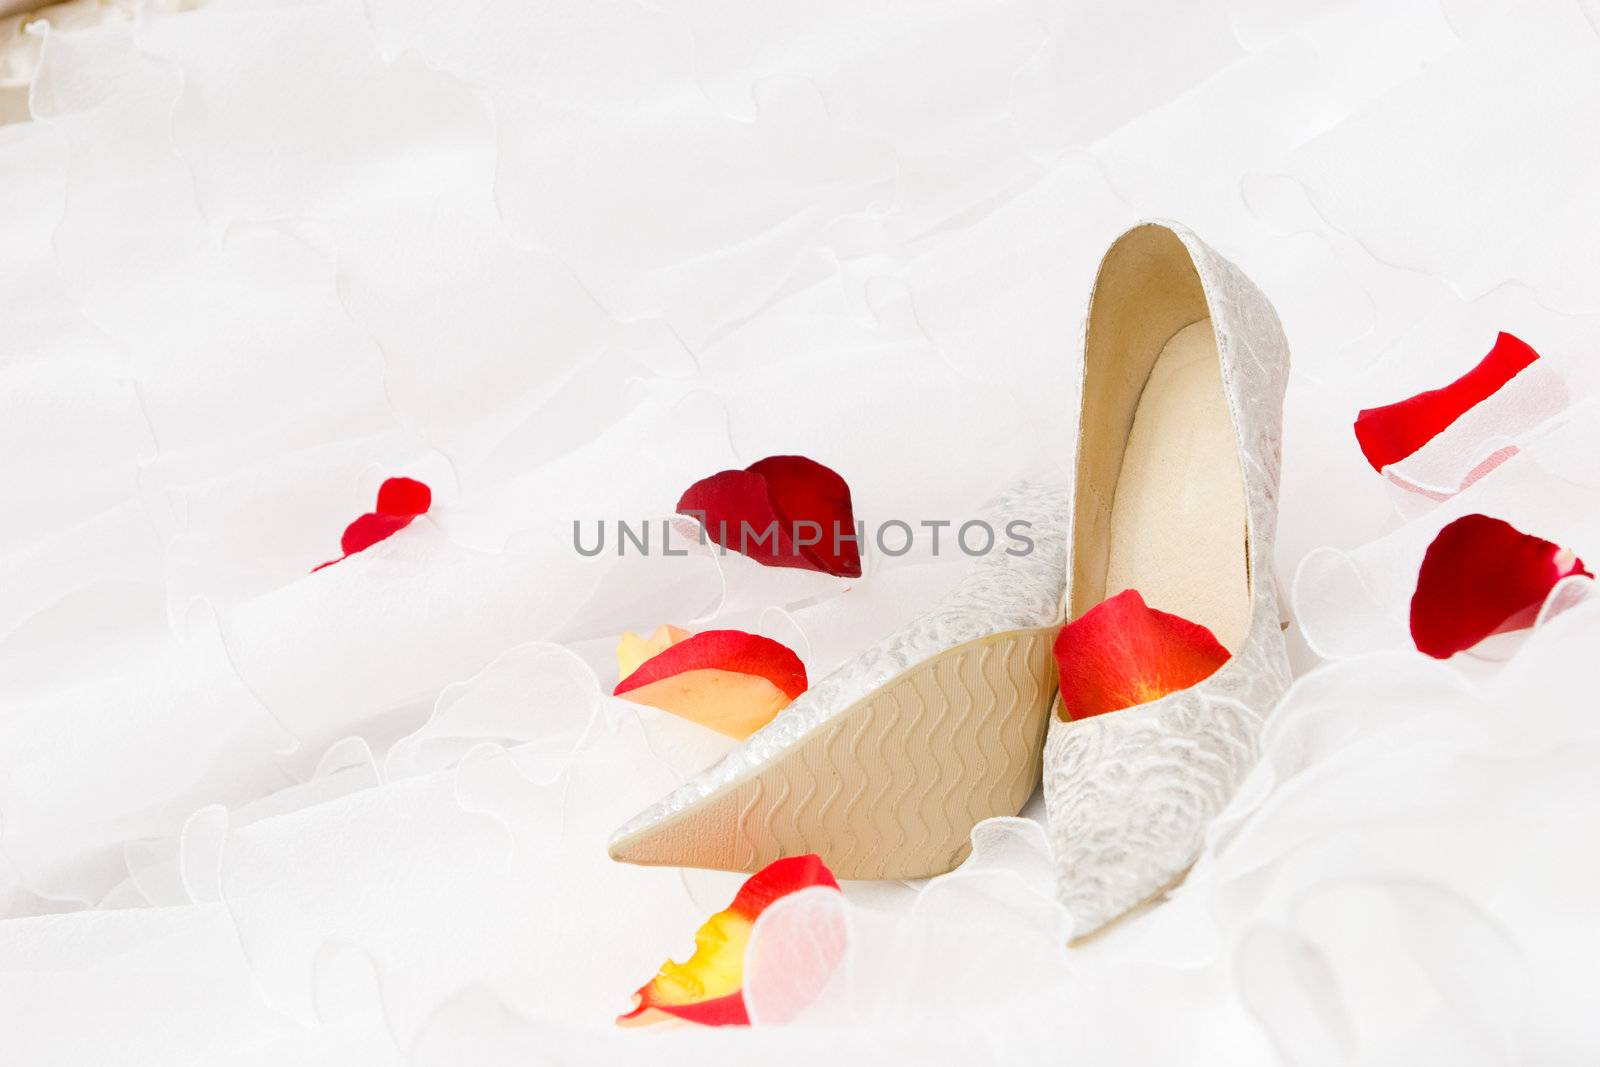 wedding shoes and rose petails by vsurkov